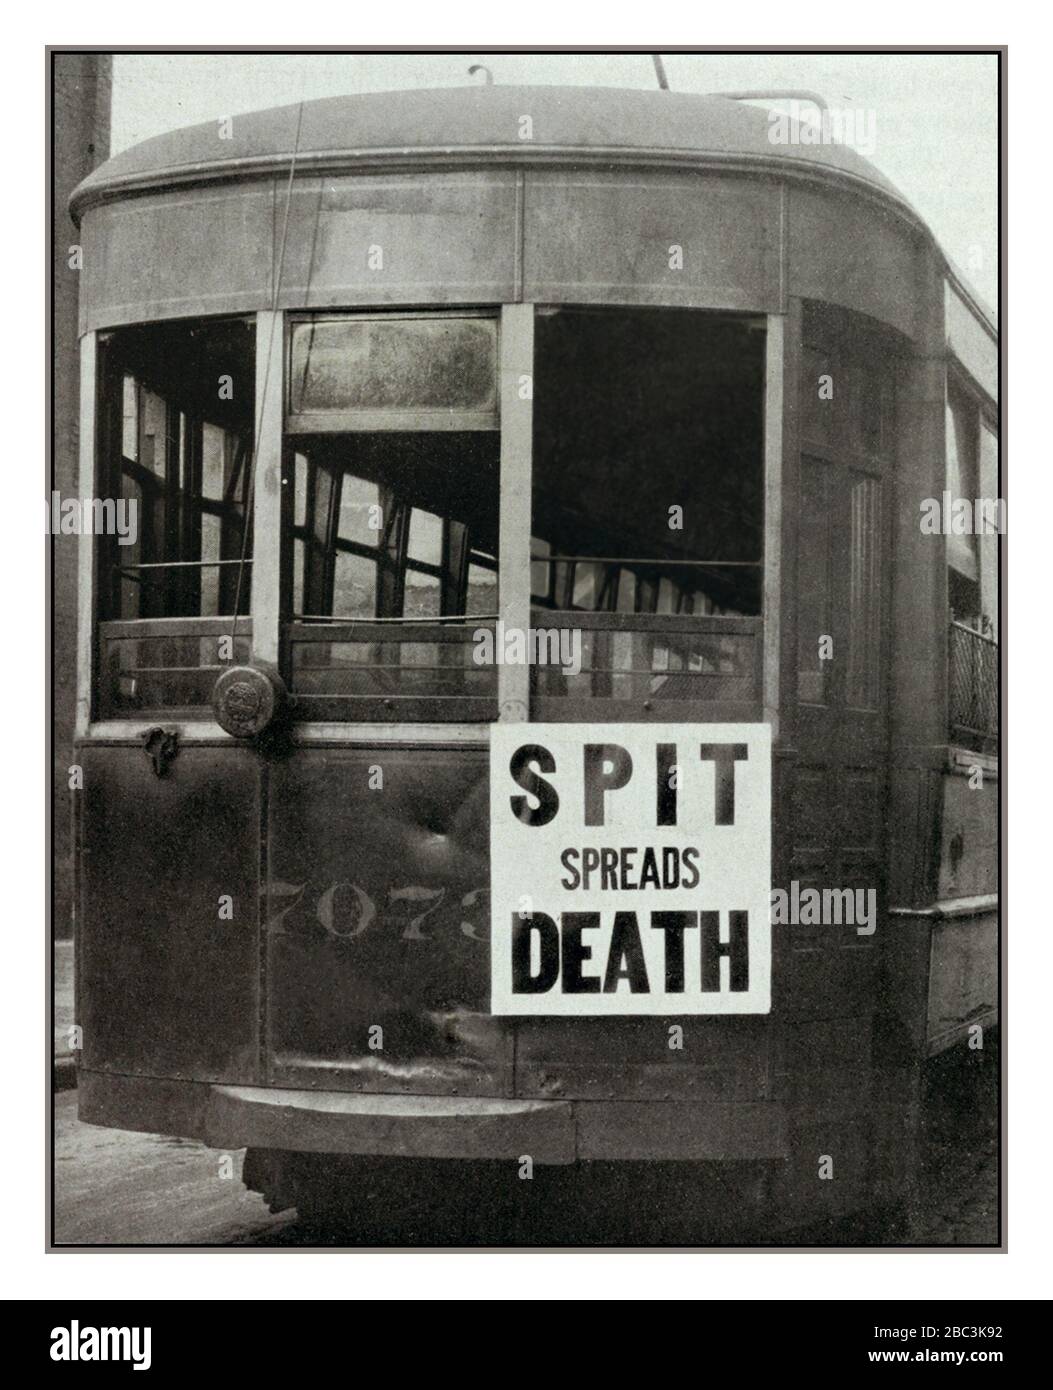 PANDEMIC SPANISH FLU Archive 1900s USA Philadelphia tram streetcar with a poster saying 'SPIT SPREADS DEATH' during the 1918-1919 Influenza Pandemic, also known as the Spanish Flu. USA concept for CORONAVIRUS Covid-19 Stock Photo